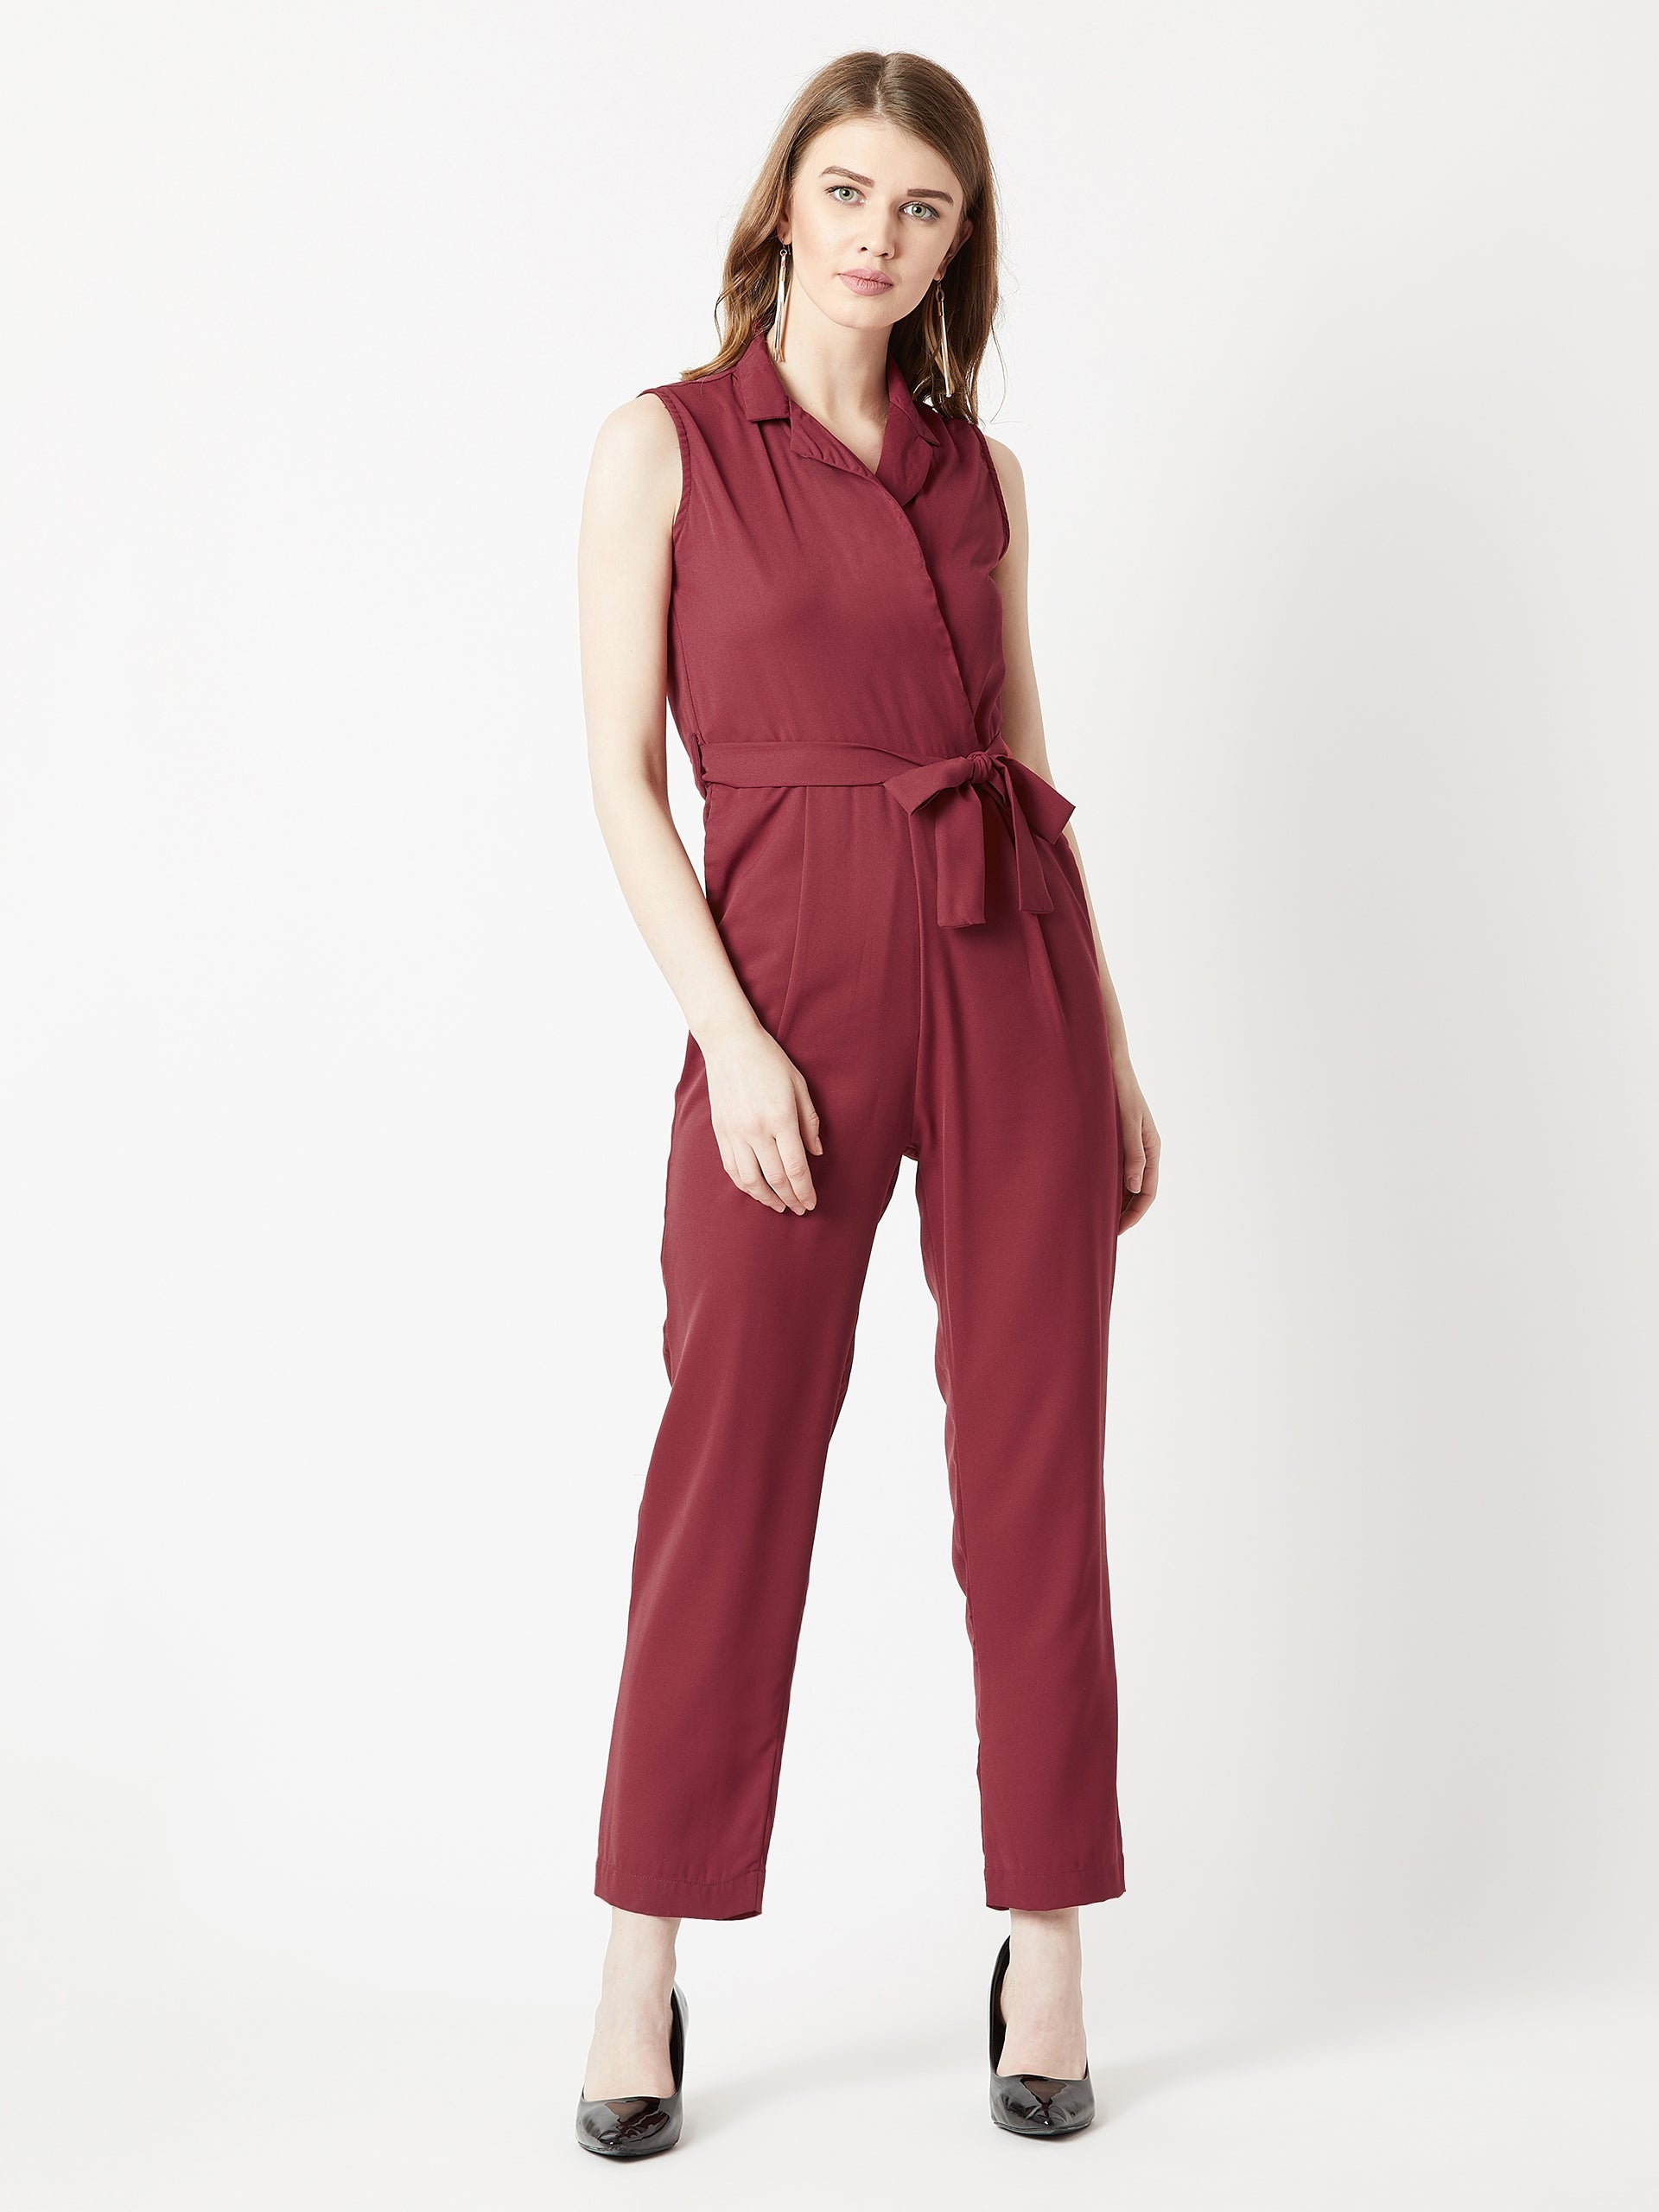 Maroon V-Neck Sleeveless Straight Leg Tie-Up Solid Belted Wrap Jumpsuit